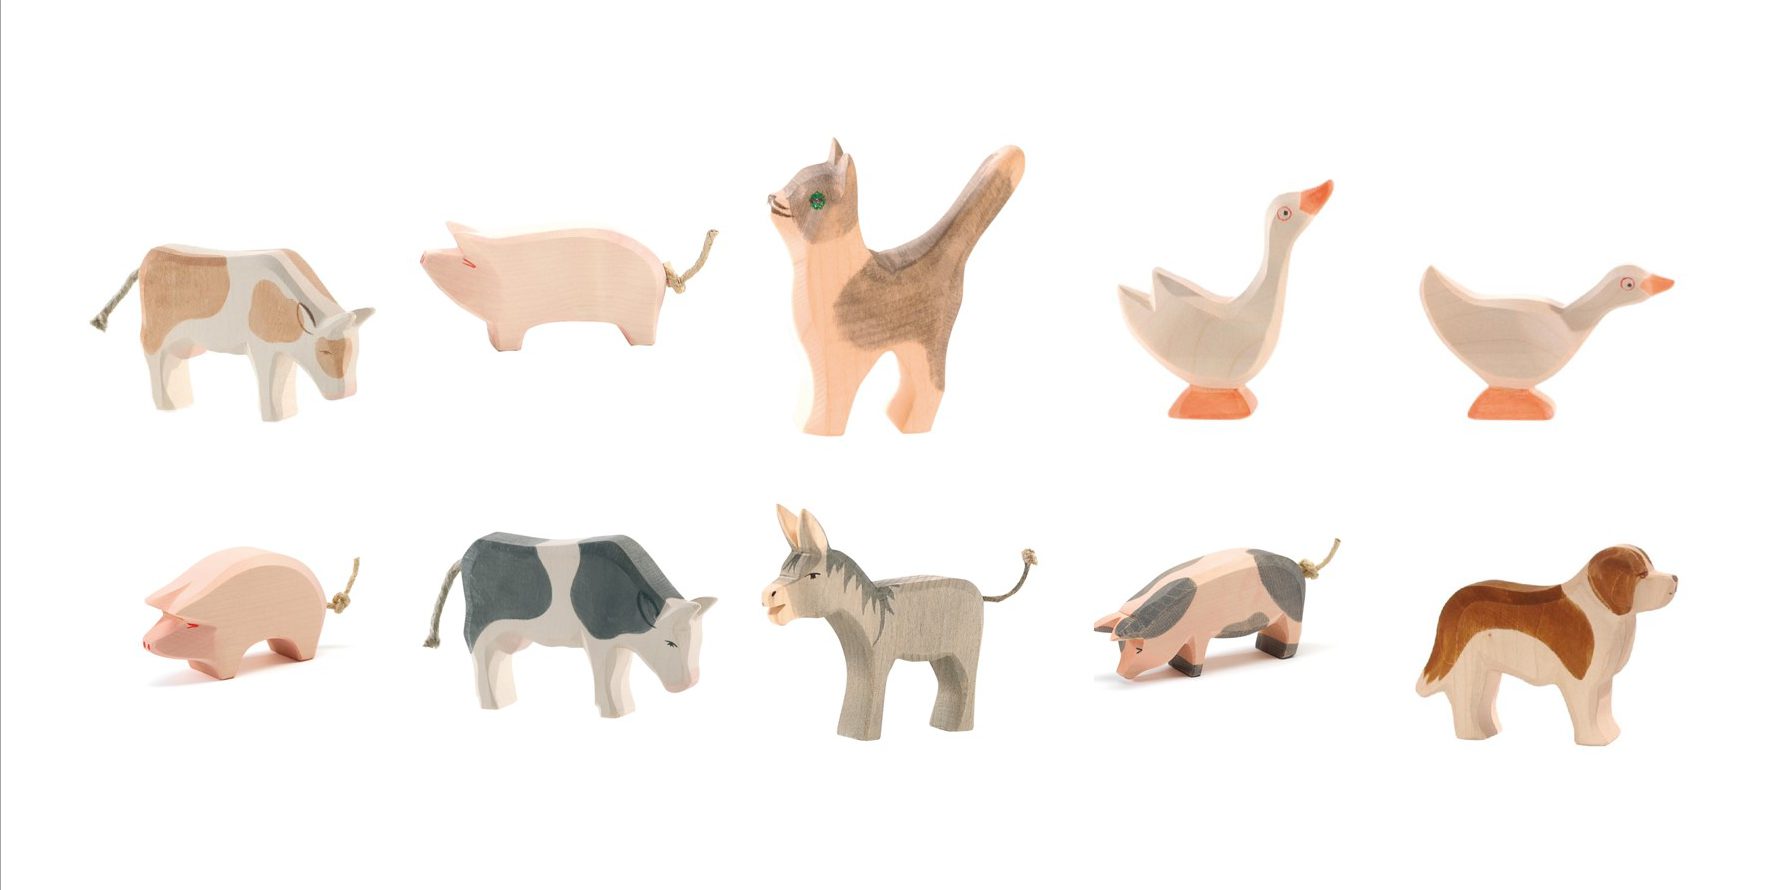 Starting your wooden animal collection - Curious Mamas